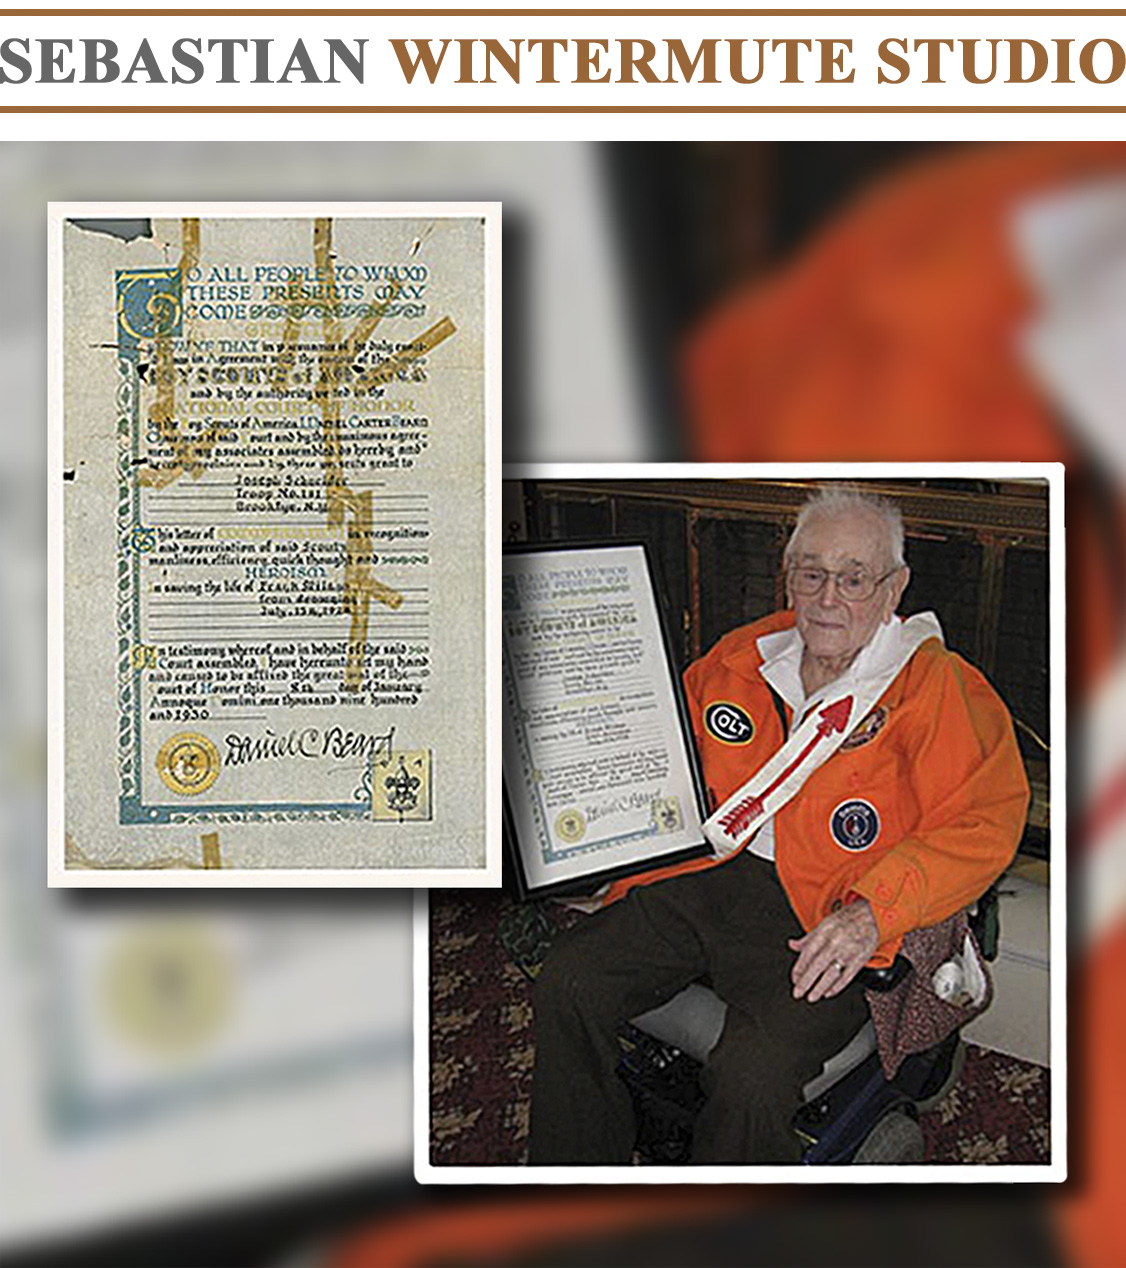 Restoration of a Boy Scout Lifesaving and Meritorious Action Award for saving a man from drowning as a present to the original recipient on his 95th birthday.